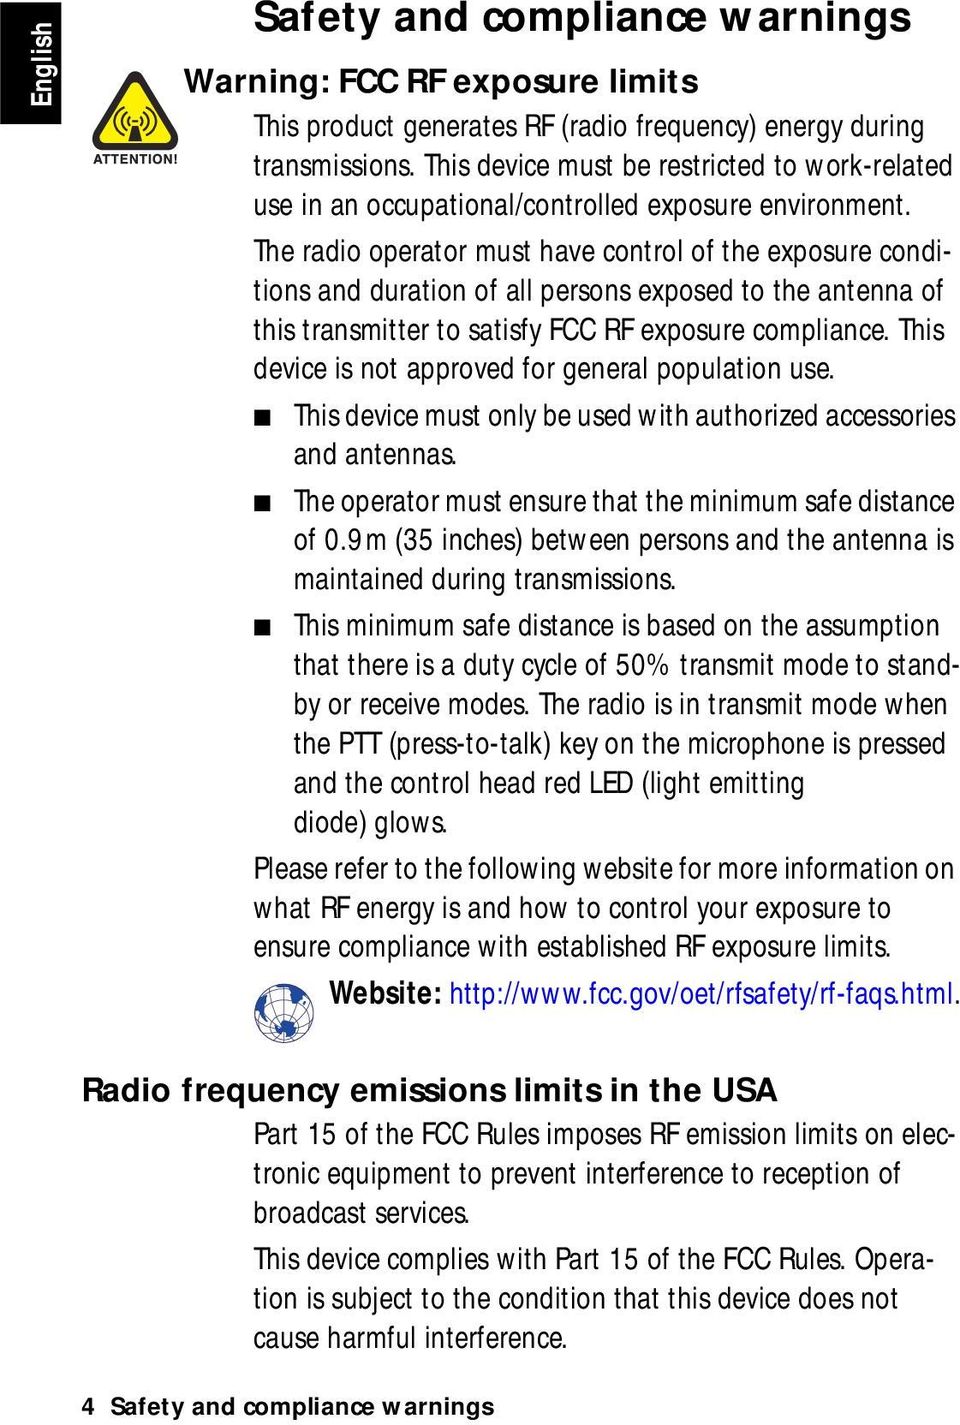 The radio operator must have control of the exposure conditions and duration of all persons exposed to the antenna of this transmitter to satisfy FCC RF exposure compliance.